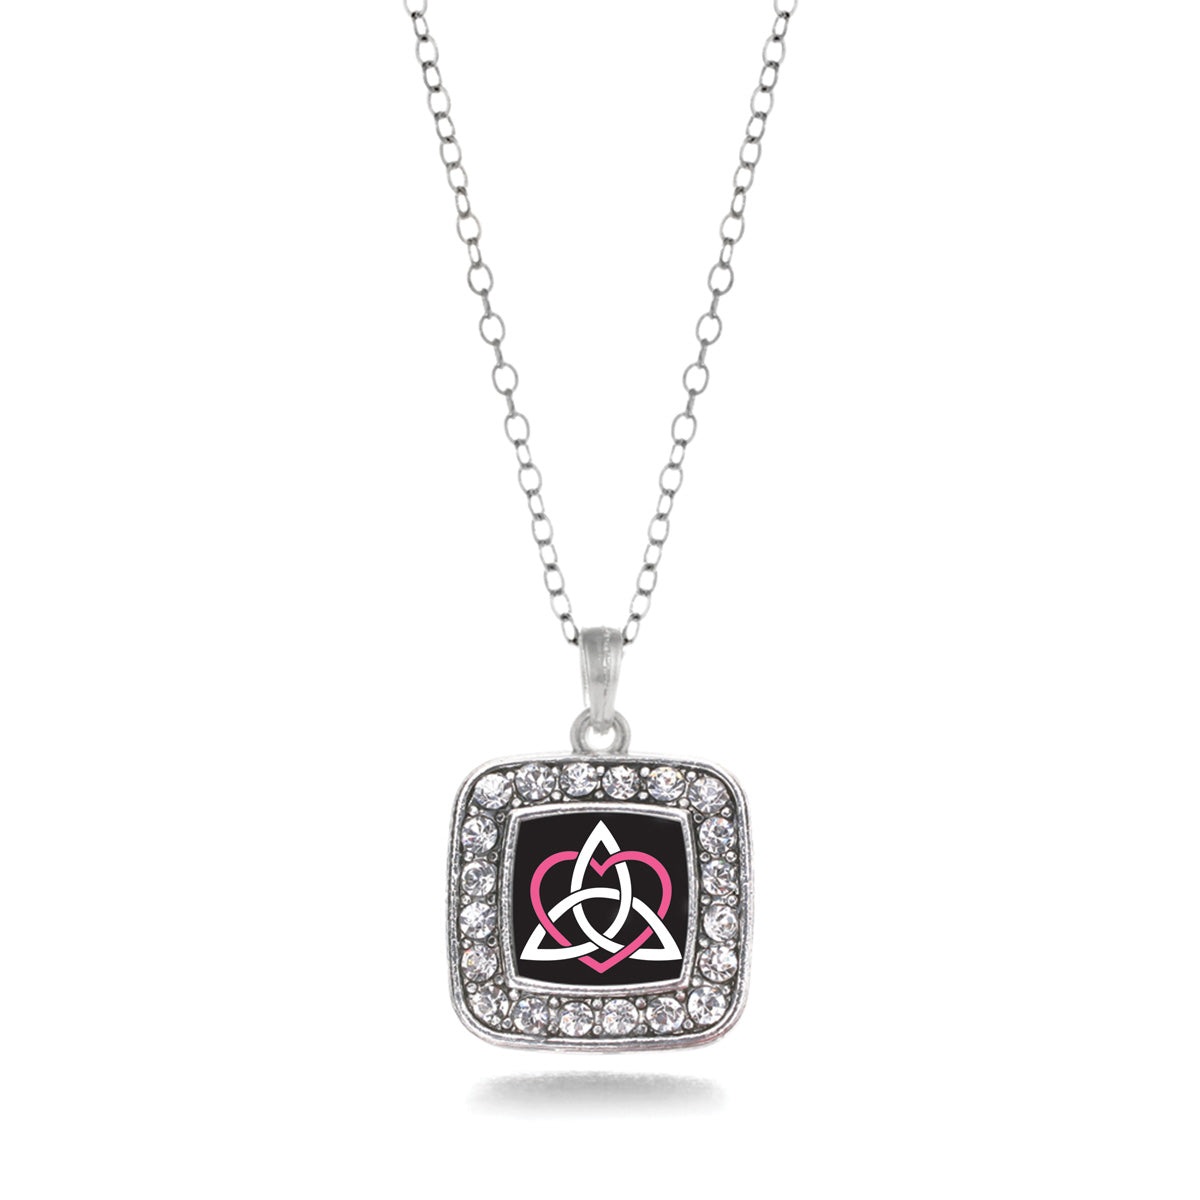 Silver Celtic Sisters Knot Square Charm Classic Necklace